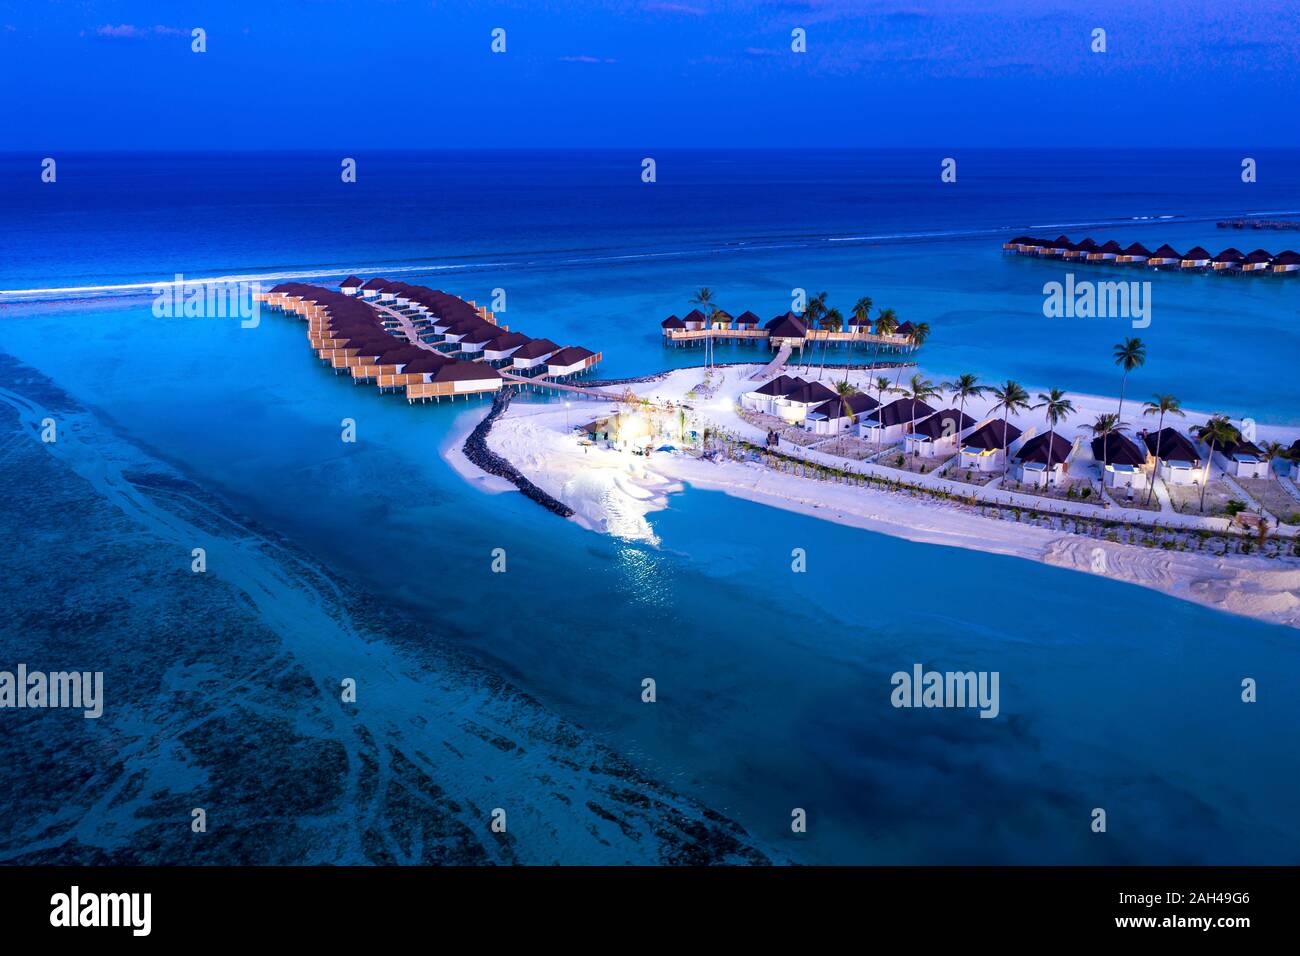 Maldives, Olhuveli, Aerial view of rows of beachside bungalows on South Male Atoll lagoon at dusk Stock Photo